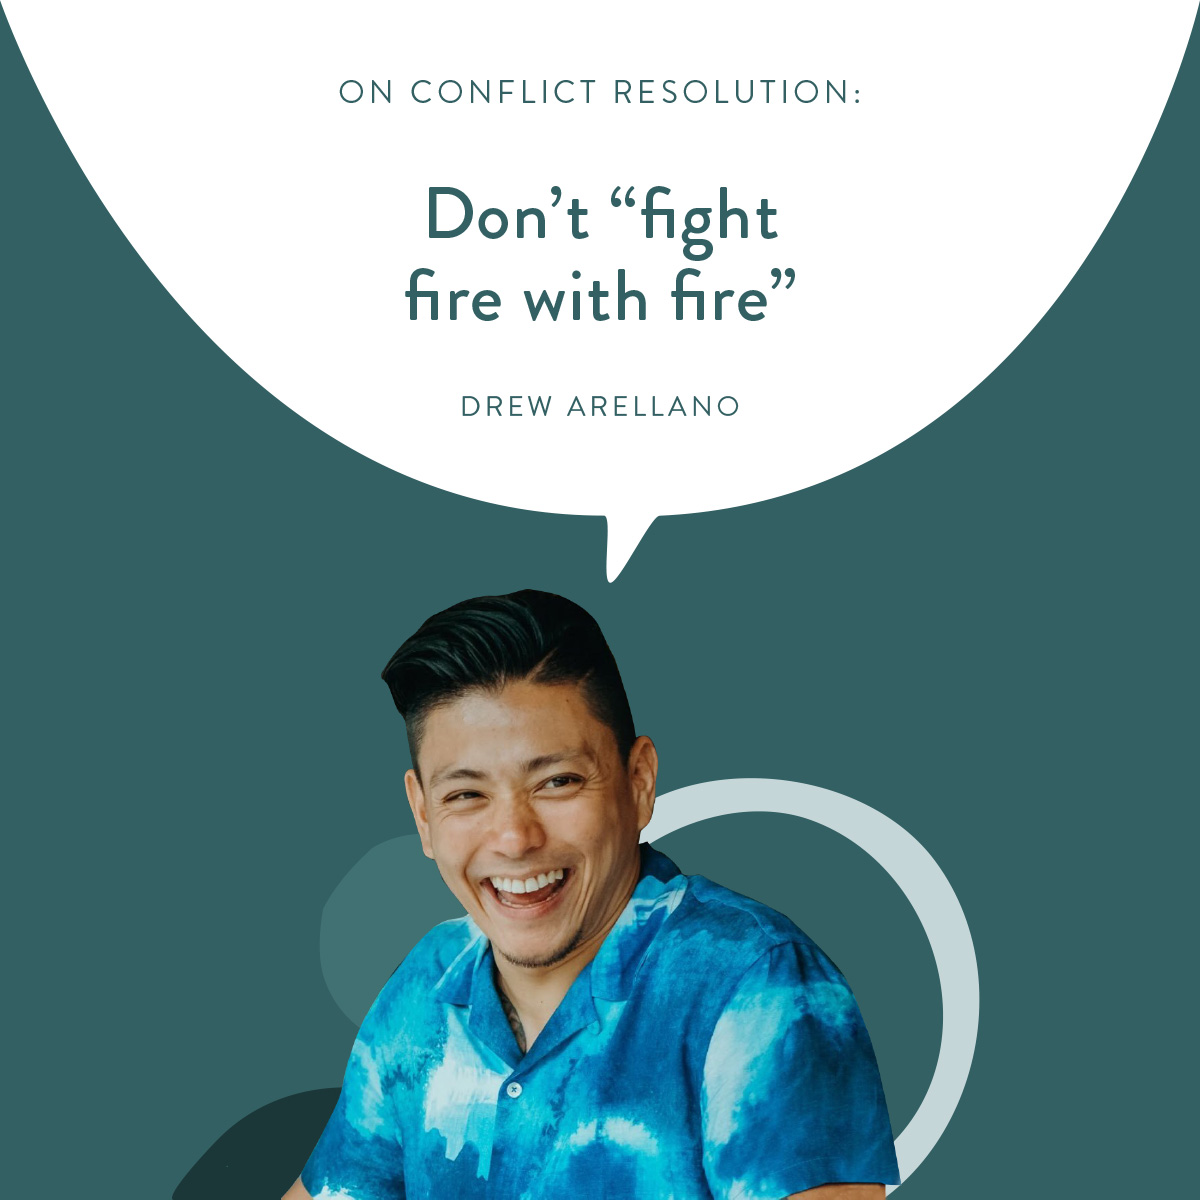 (Layout) On Conflict Resolution: Don’t "fight fire with fire." -Drew Arellano